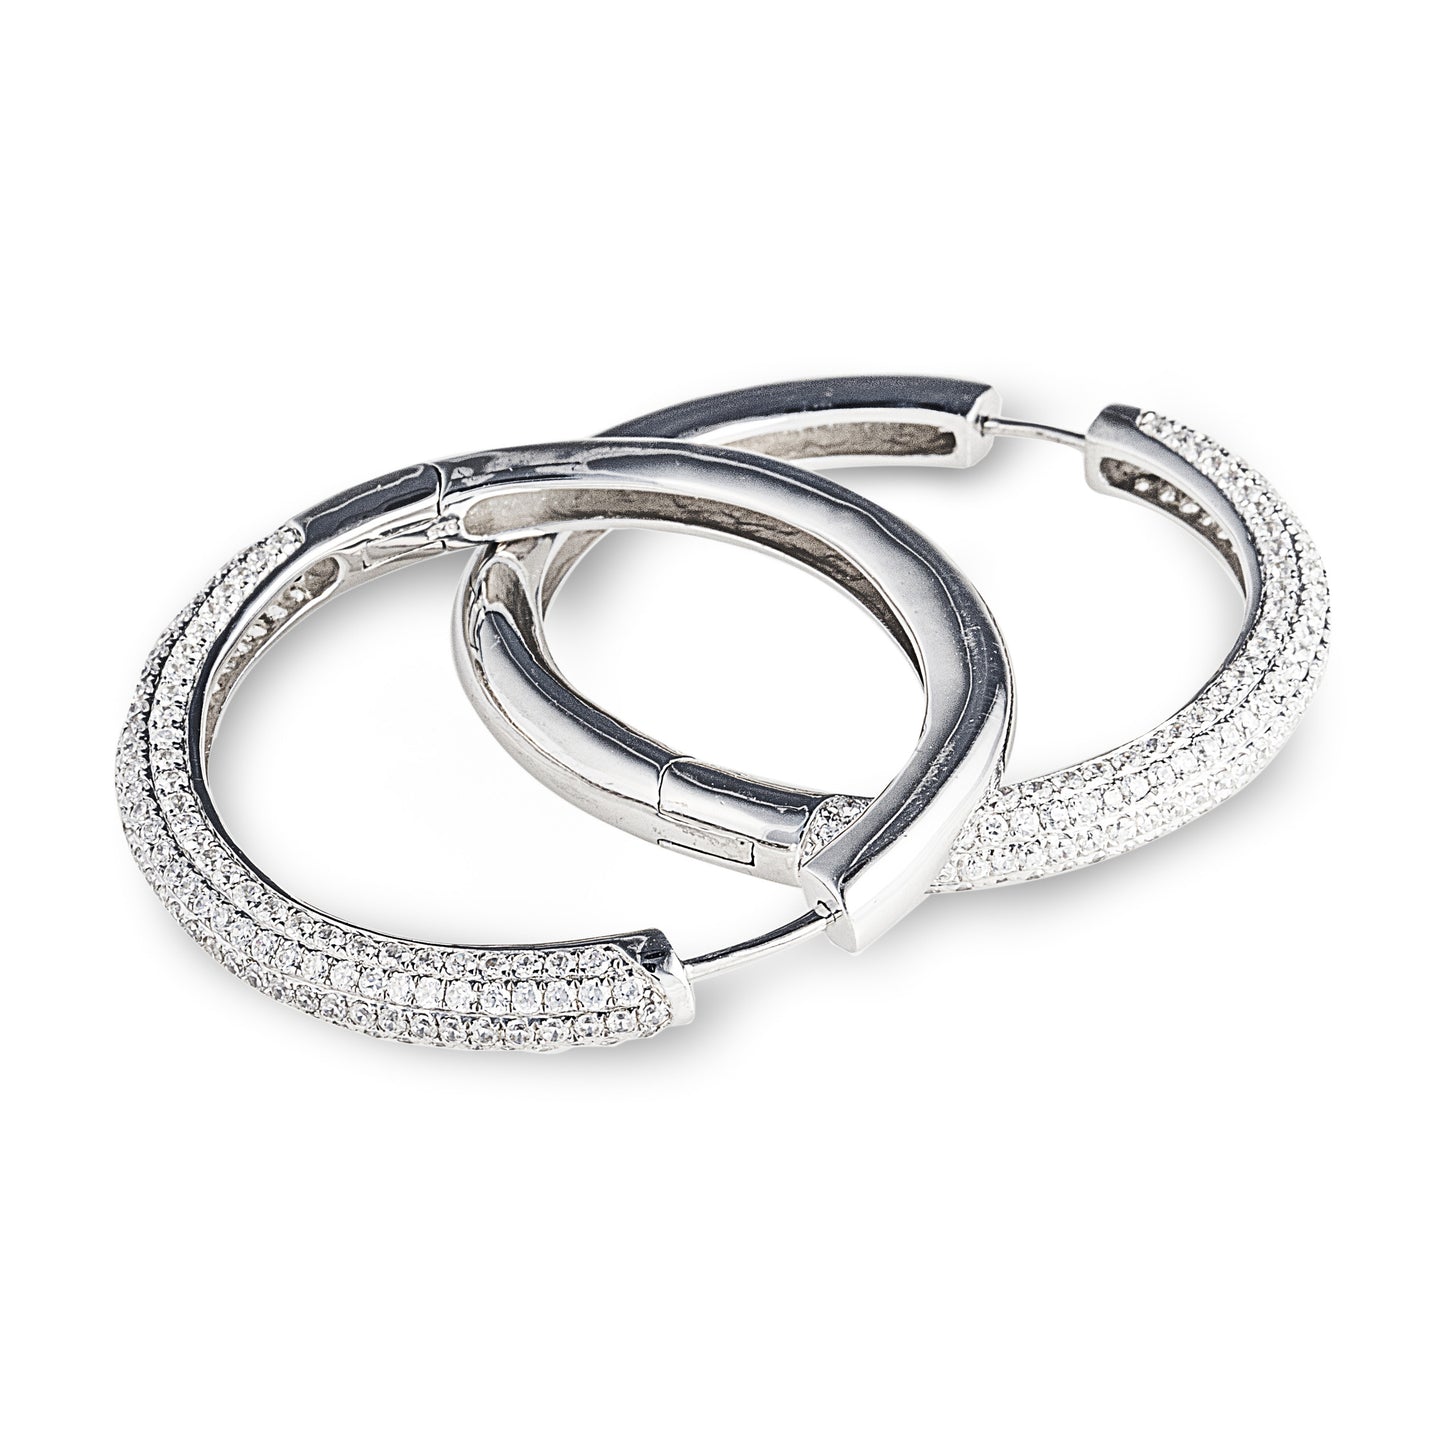 large-sized J-Lo Hoop Earrings in 925 Sterling Silver with 9ct white gold posts, featuring pavé set cubic zirconia stones. Worldwide Shipping. Affordable luxury jewellery by Bellagio & Co.